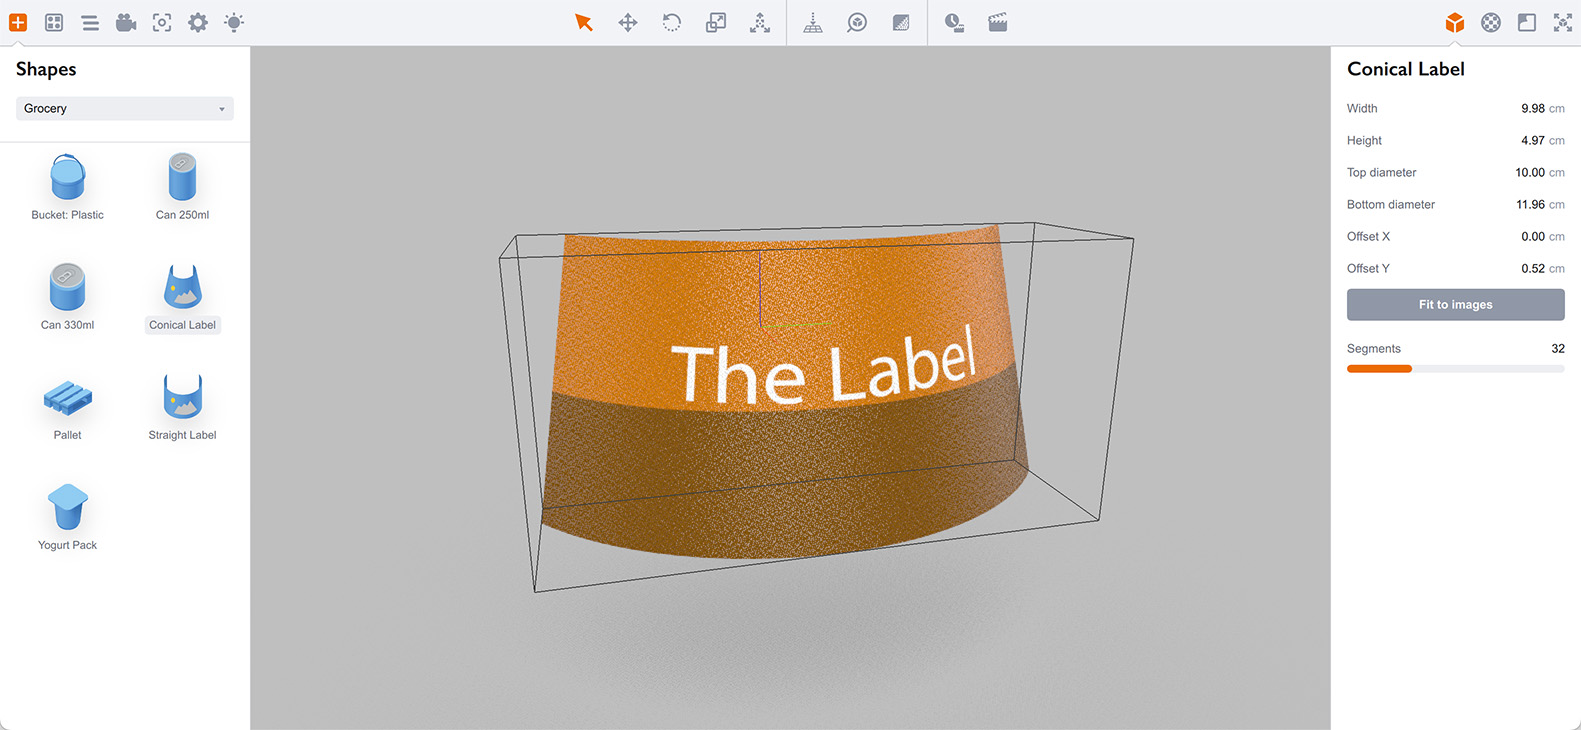 Now we can see the new conical label in 3D